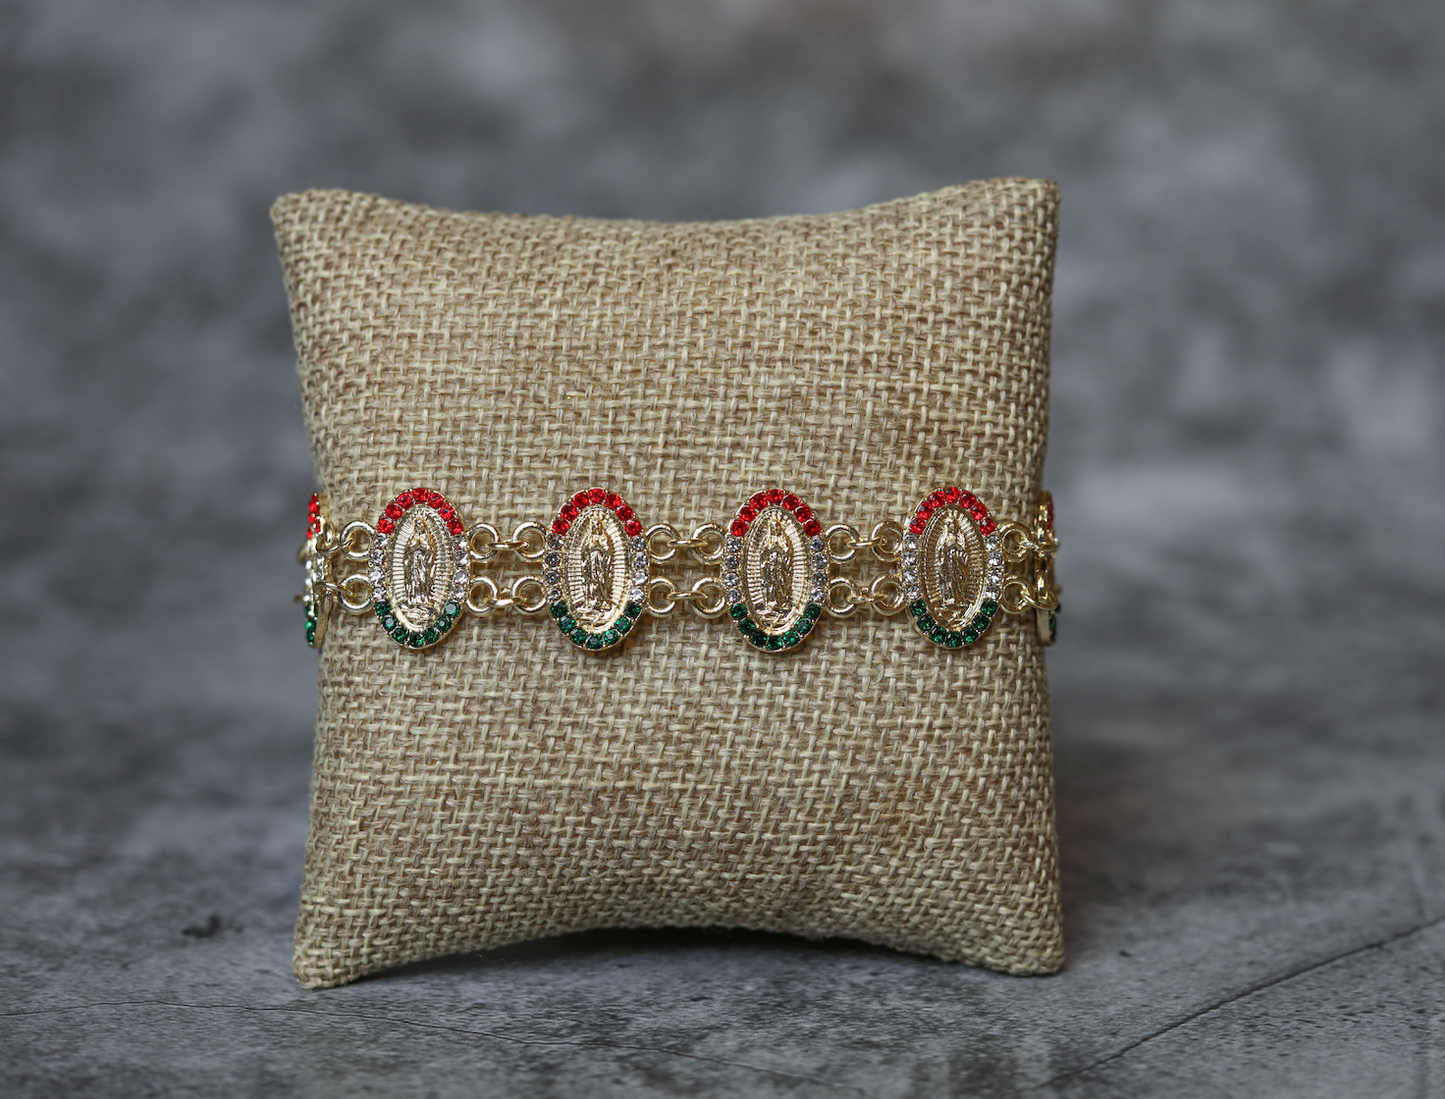 Multicultural oval-shaped gold-plated bracelets of the Virgin of Guadalupe with green and red stones. 